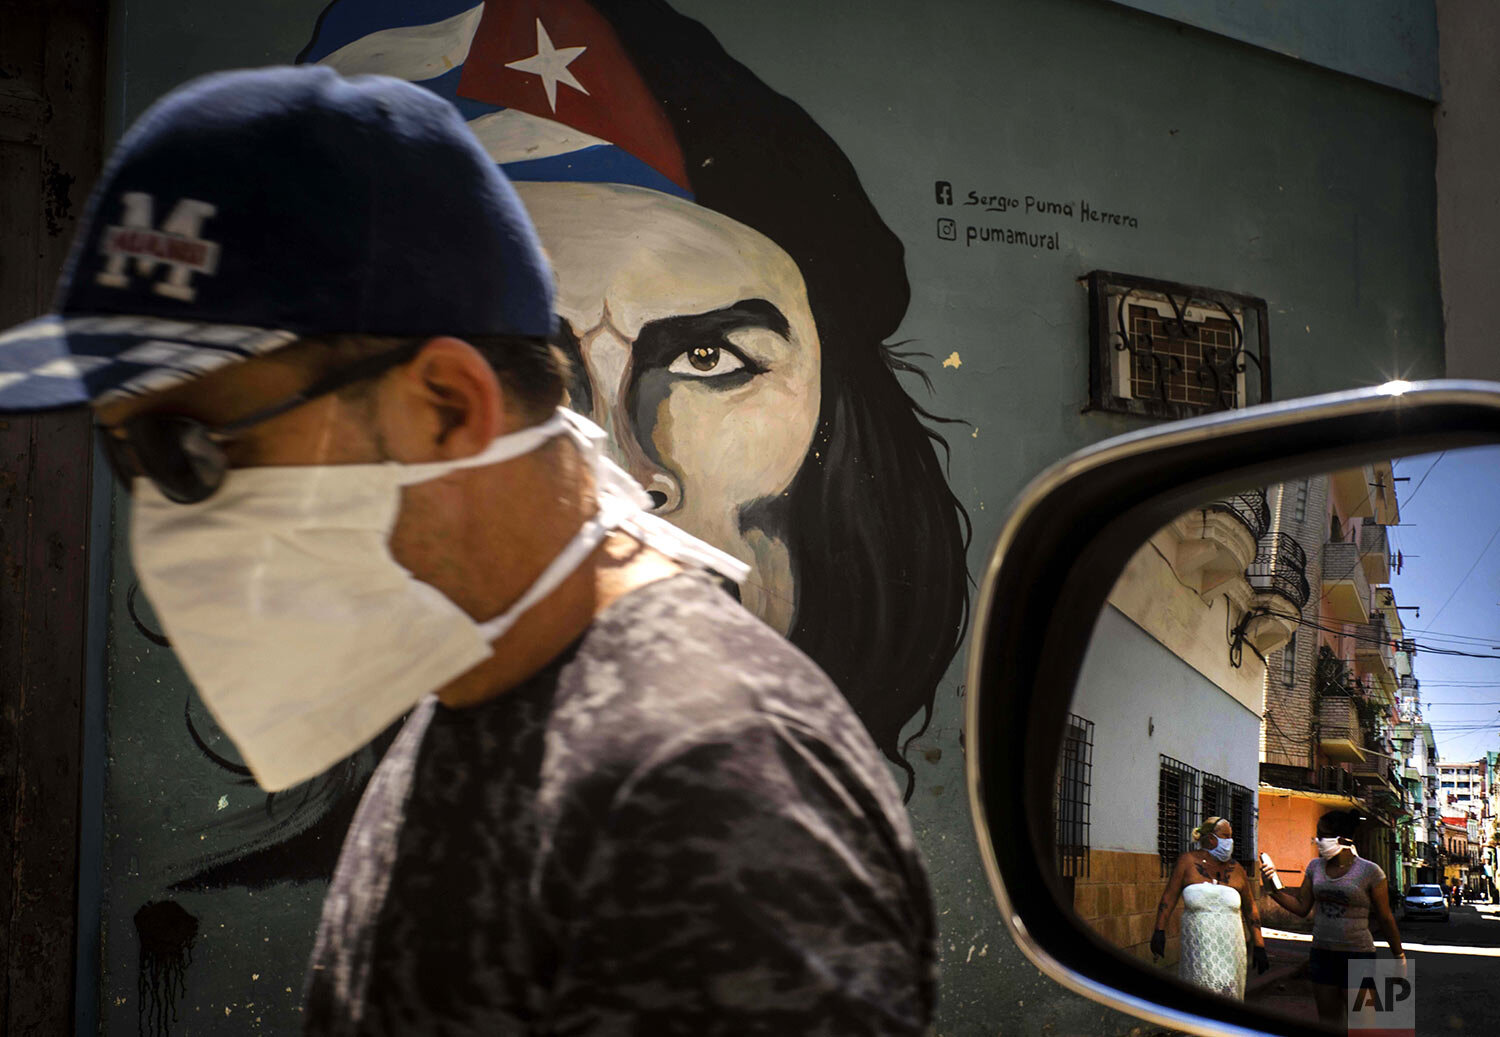  A man wearing a mask walks alongside a mural of Ernesto "Che" Guevara as other pedestrians are reflected in the side-view mirror of a car in Havana, Cuba, Tuesday, April 7, 2020. (AP Photo/Ramon Espinosa) 